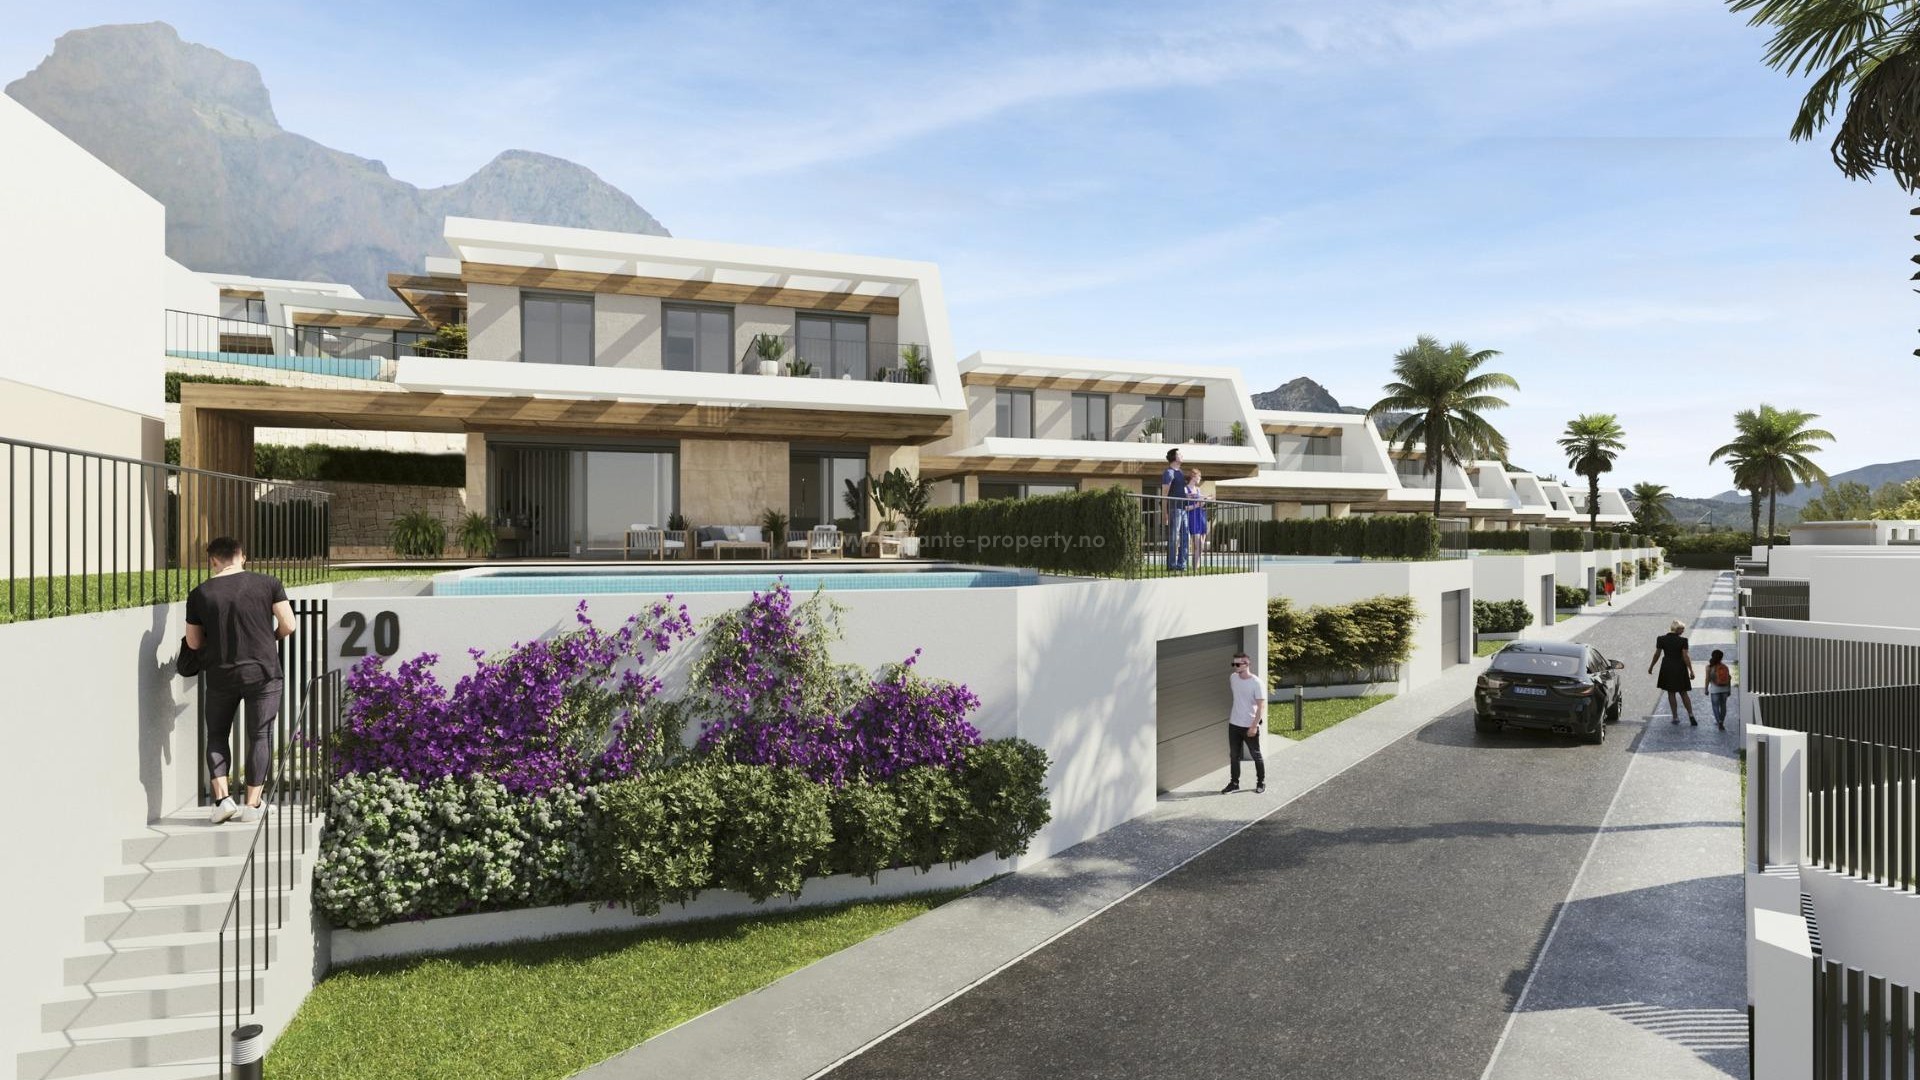 Villas/houses in Polop, Alicante-North, 2/3 bedrooms, 2 bathrooms, terraces with panoramic views, gardens, verandas and solarium in each house, possibility of pool